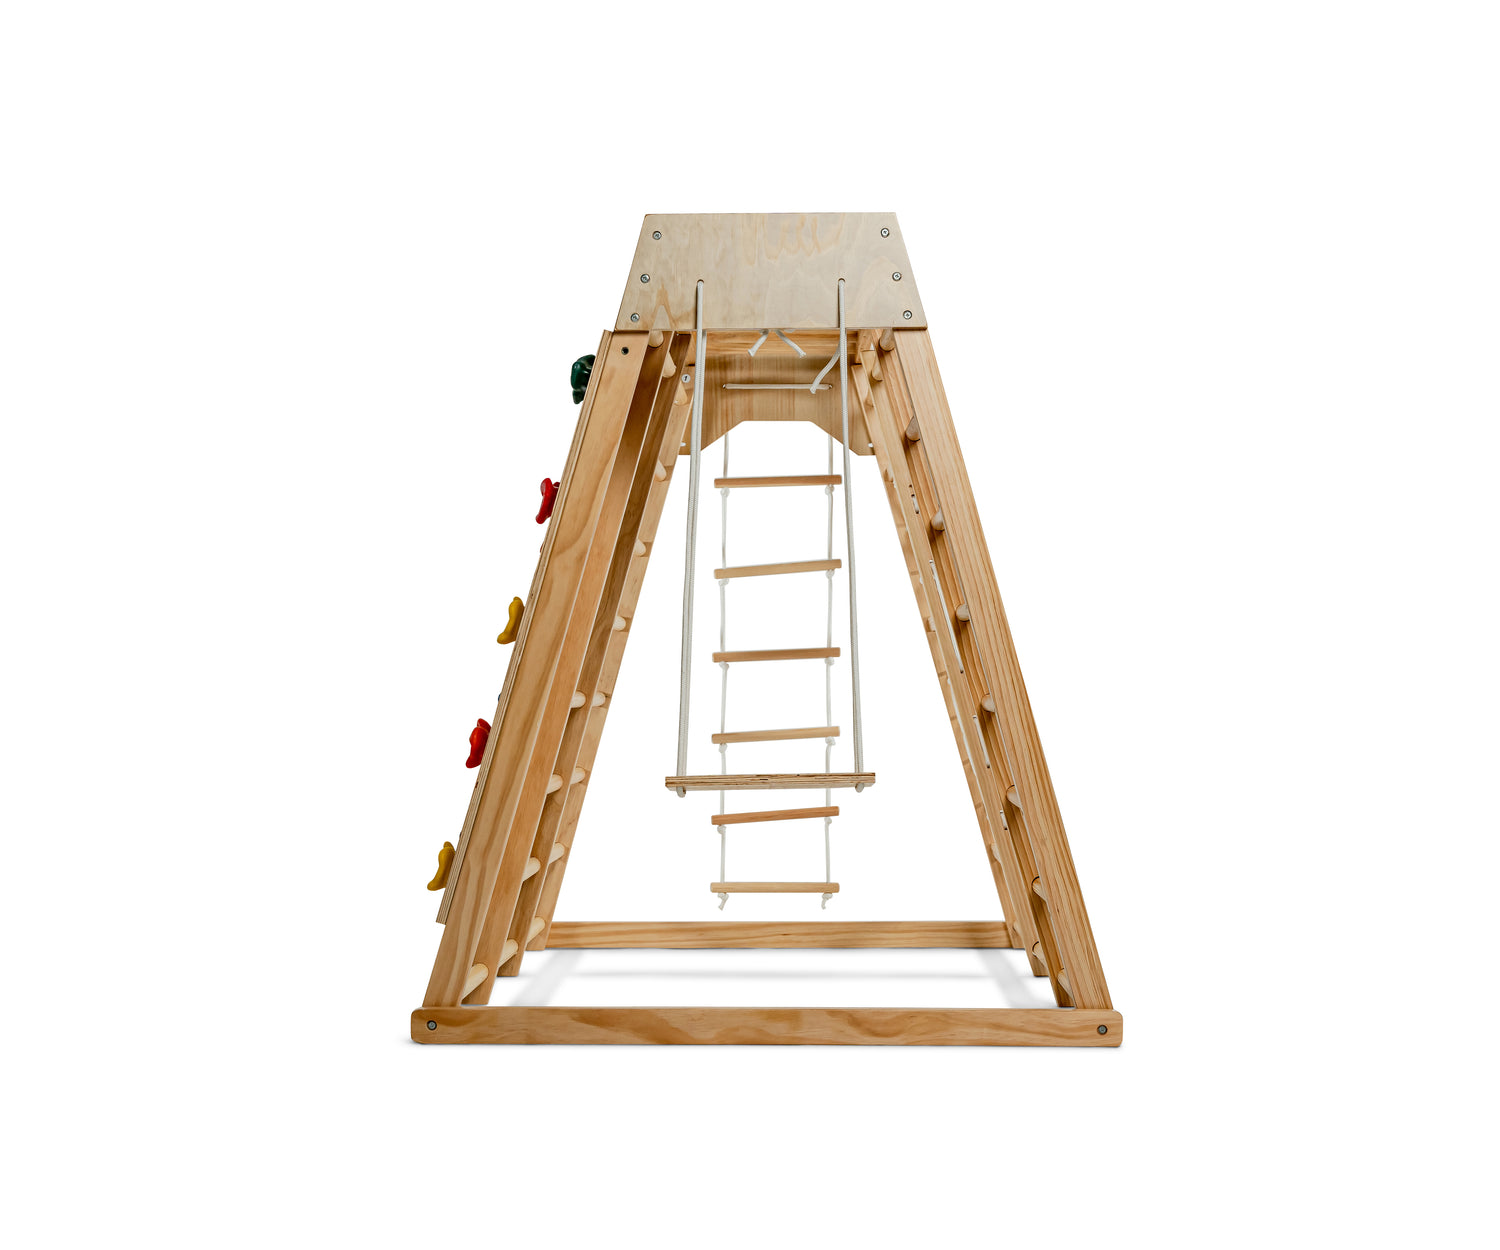 Avenlur's Magnolia Natural Color Real Wood Large Climber Playset - Side View